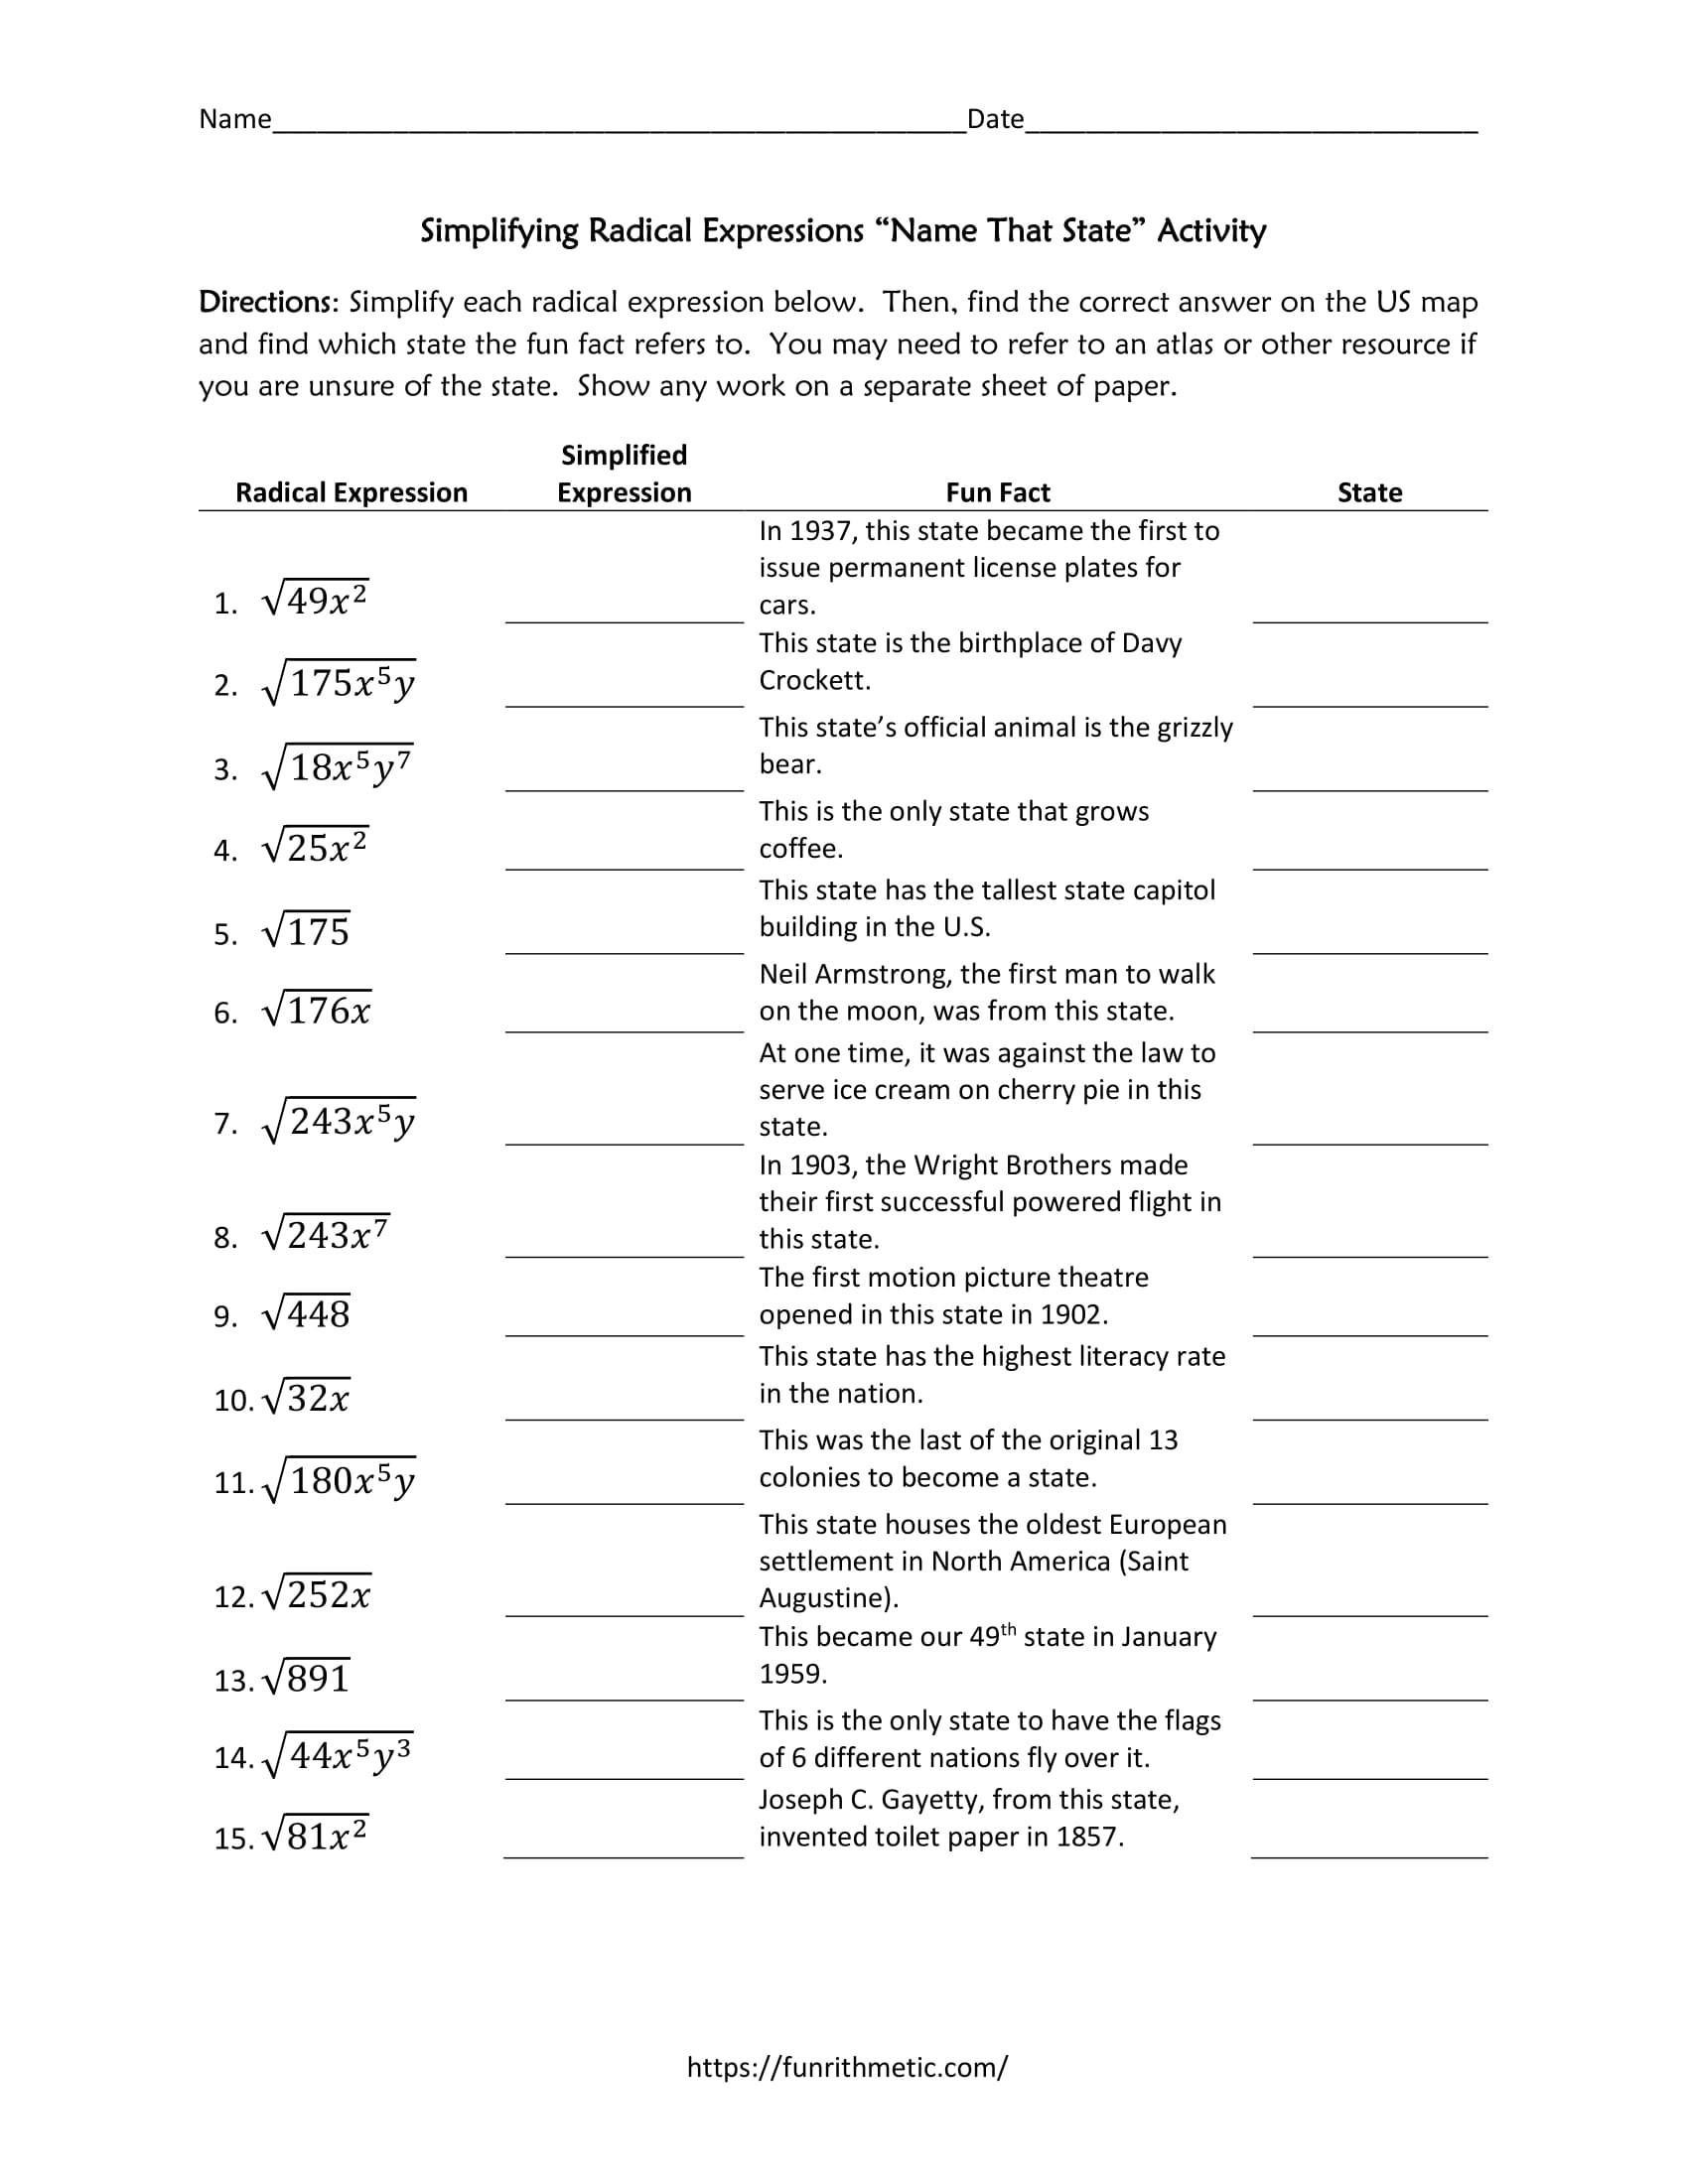 Simplifying Radical Expressions Worksheet Answers Simplifying Radical Expressions &quot;name that State&quot; Cross